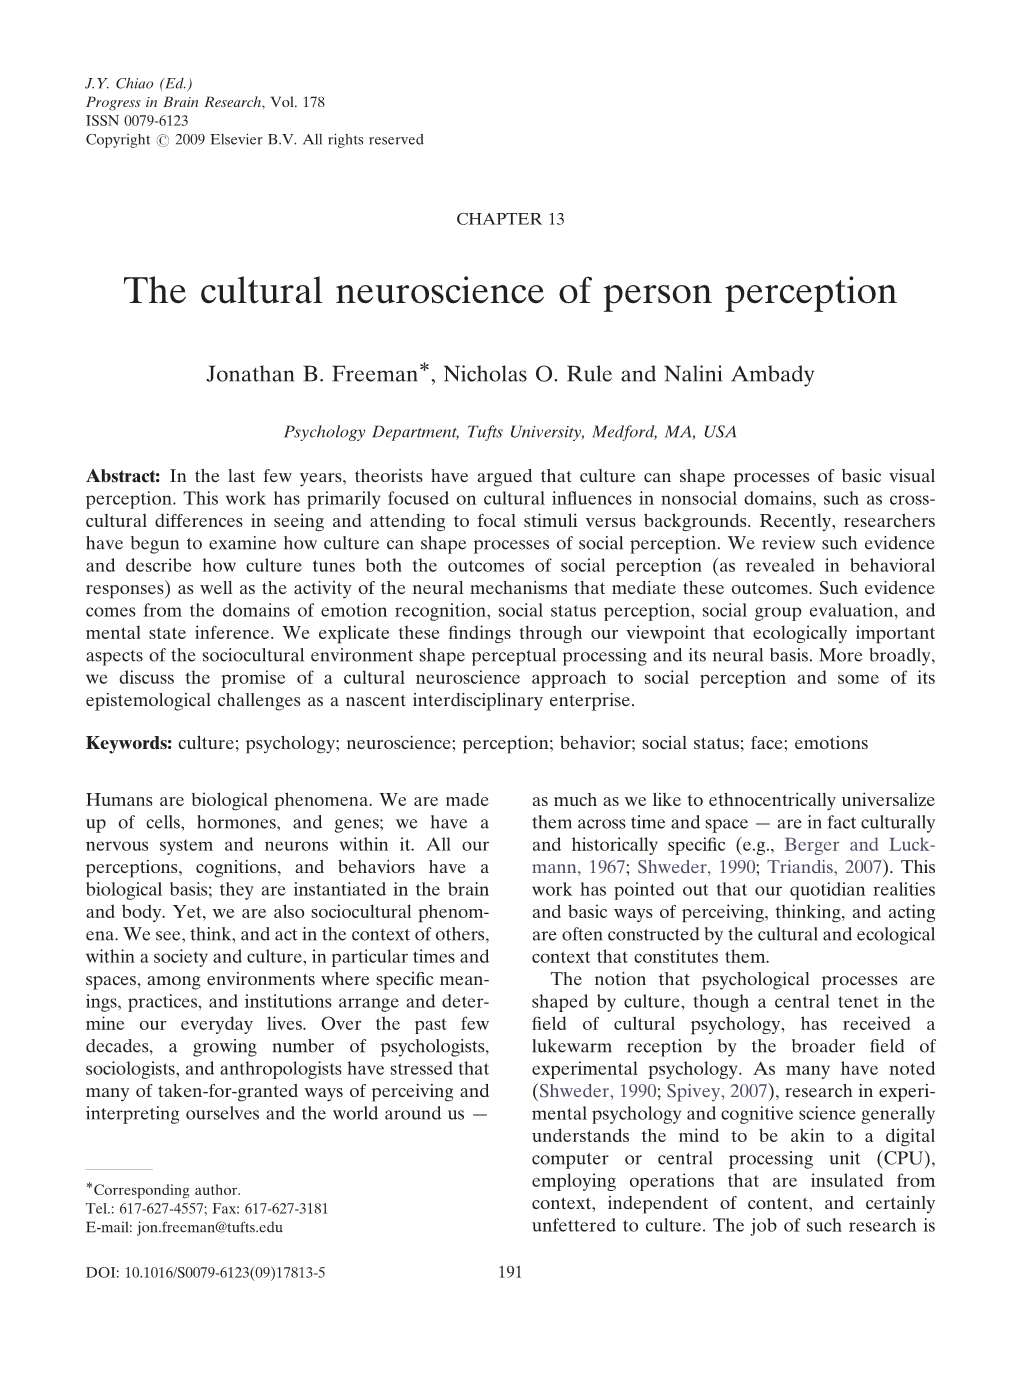 The Cultural Neuroscience of Person Perception